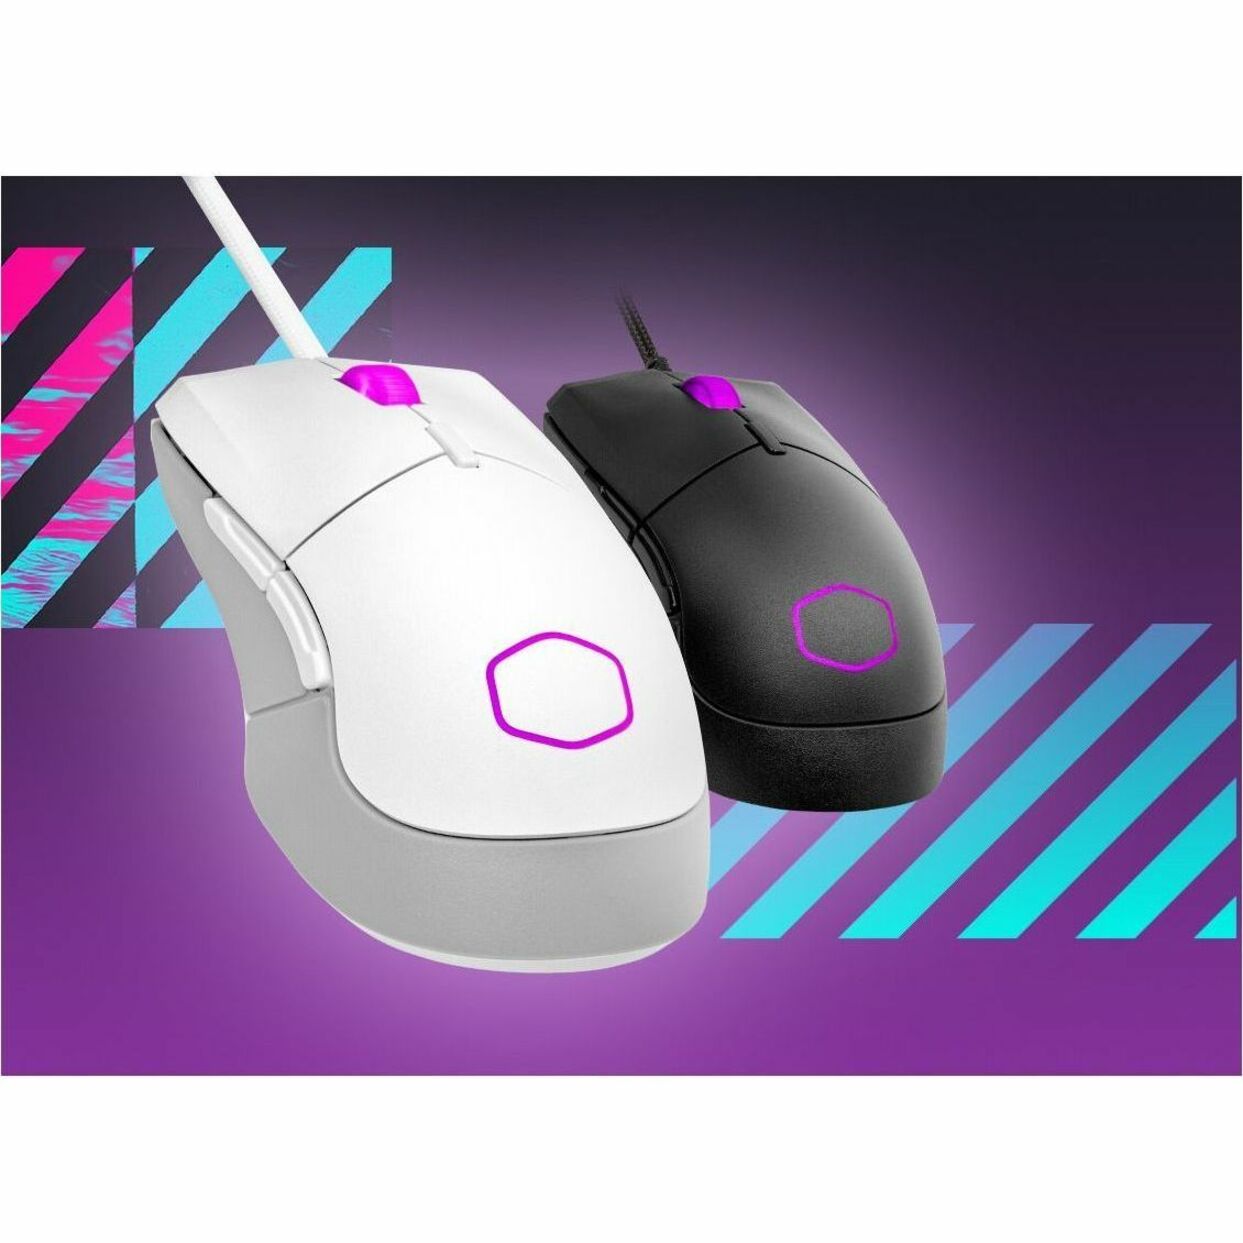 Cooler Master MM-310-WWOL1 MM310 Gaming Mouse, Ergonomic Fit, 12000 dpi, USB Type A